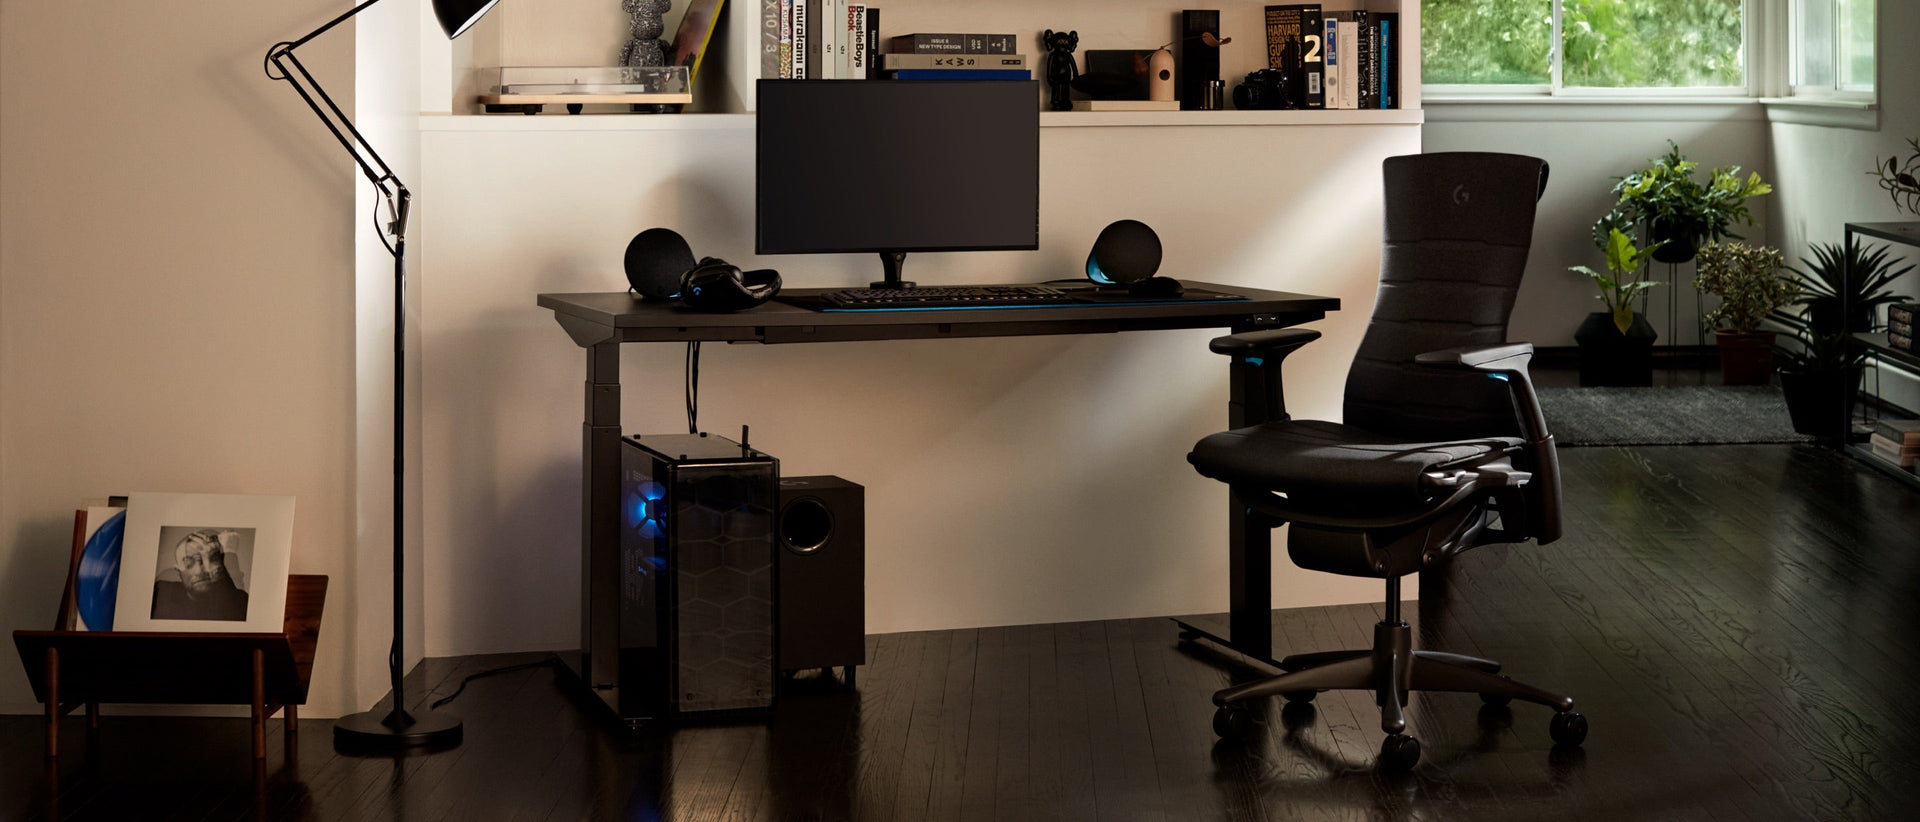 A residential setting features the full set-up, including the Embody Gaming Chair, Ollin Monitor Arm and Motia Gaming Desk, at night